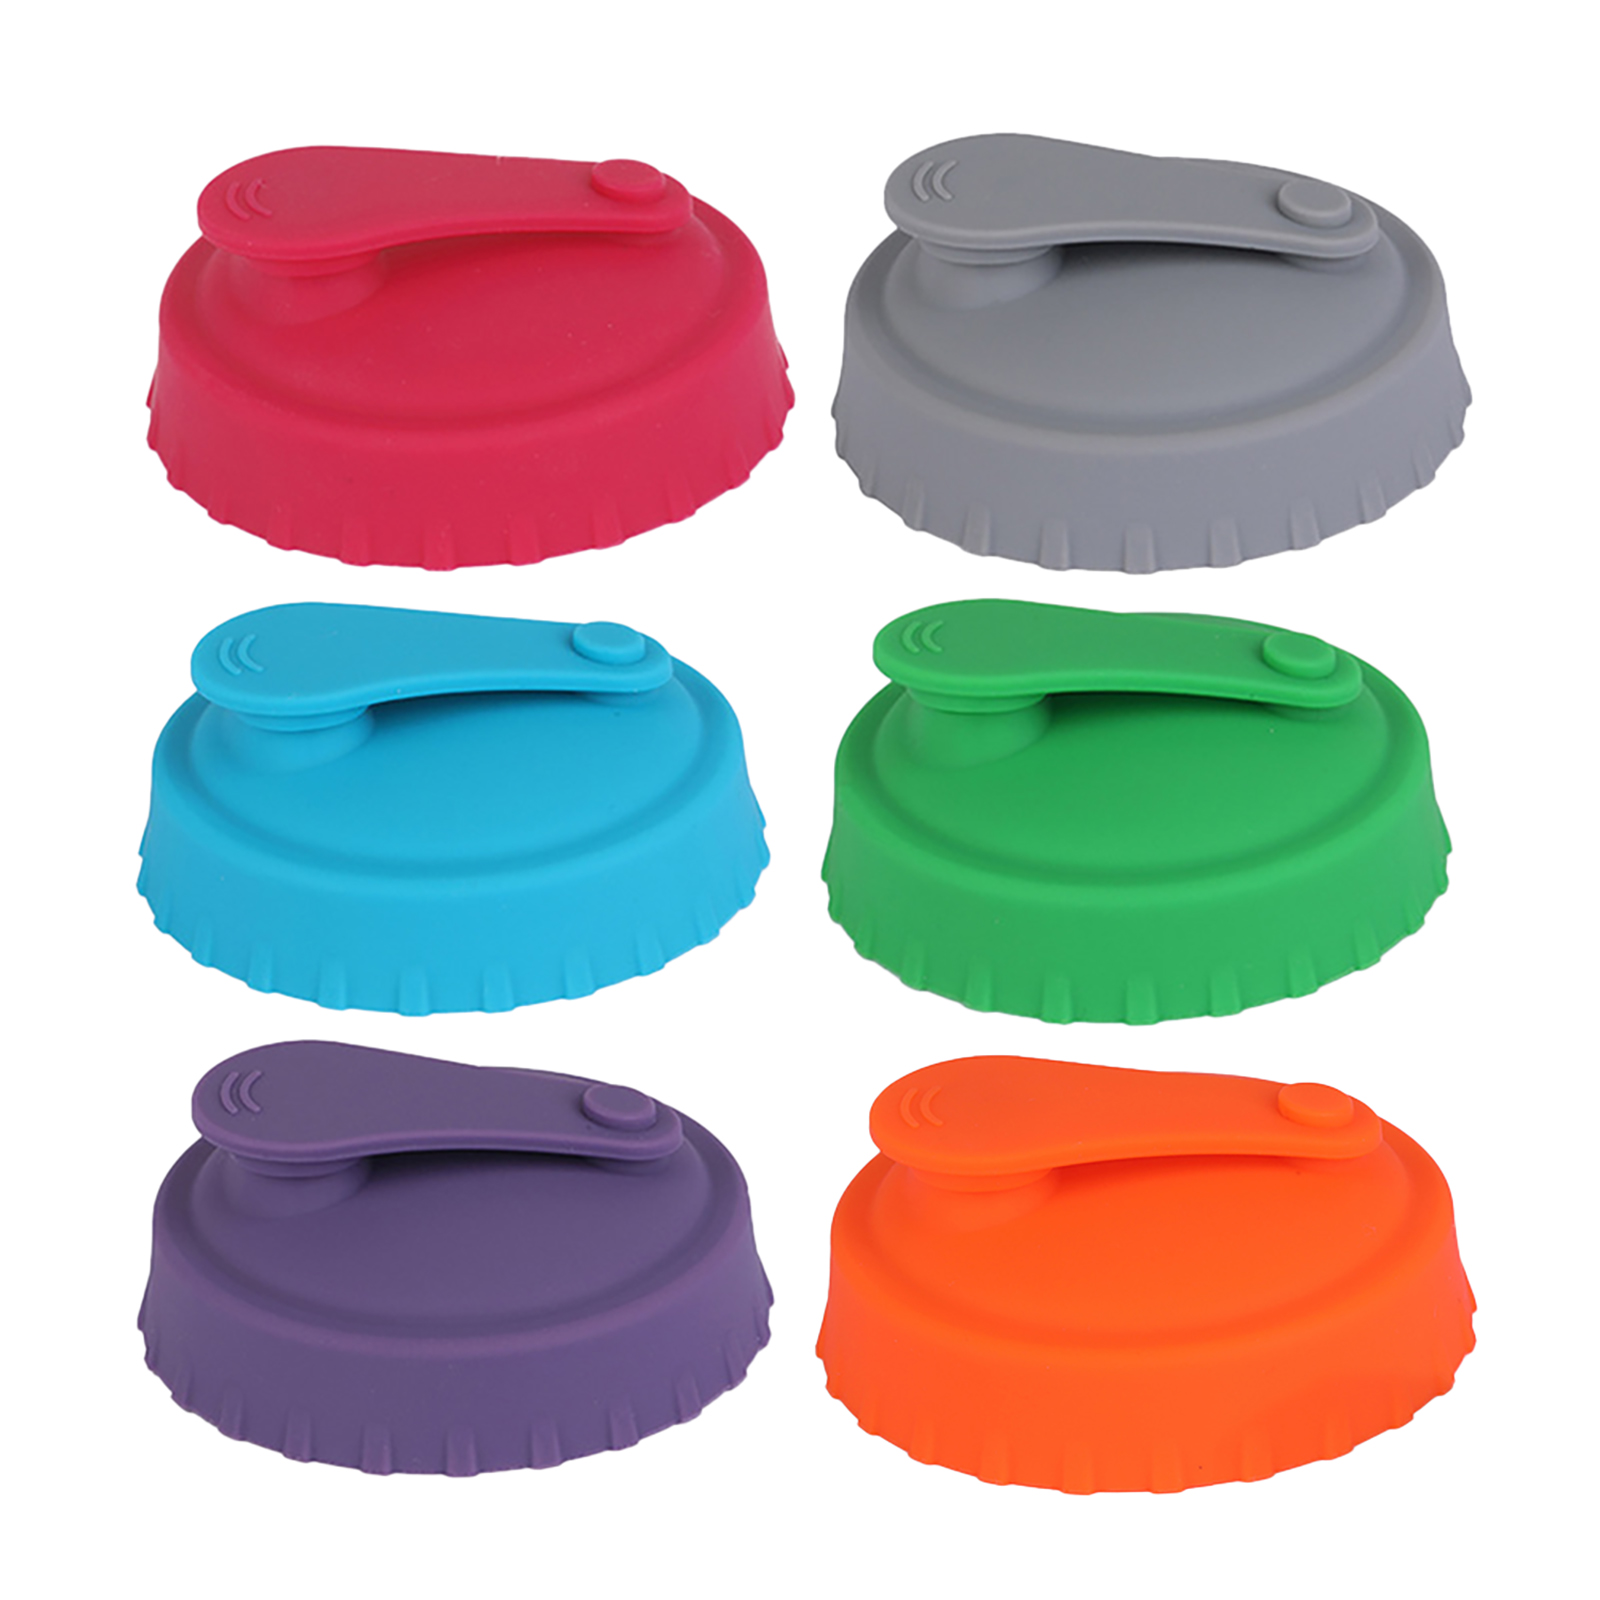 Silicone Can Cover 6 Pack Reusable Leak-proof Dishwasher Safe Silicone Can Lids For Outdoor Picnics Travel